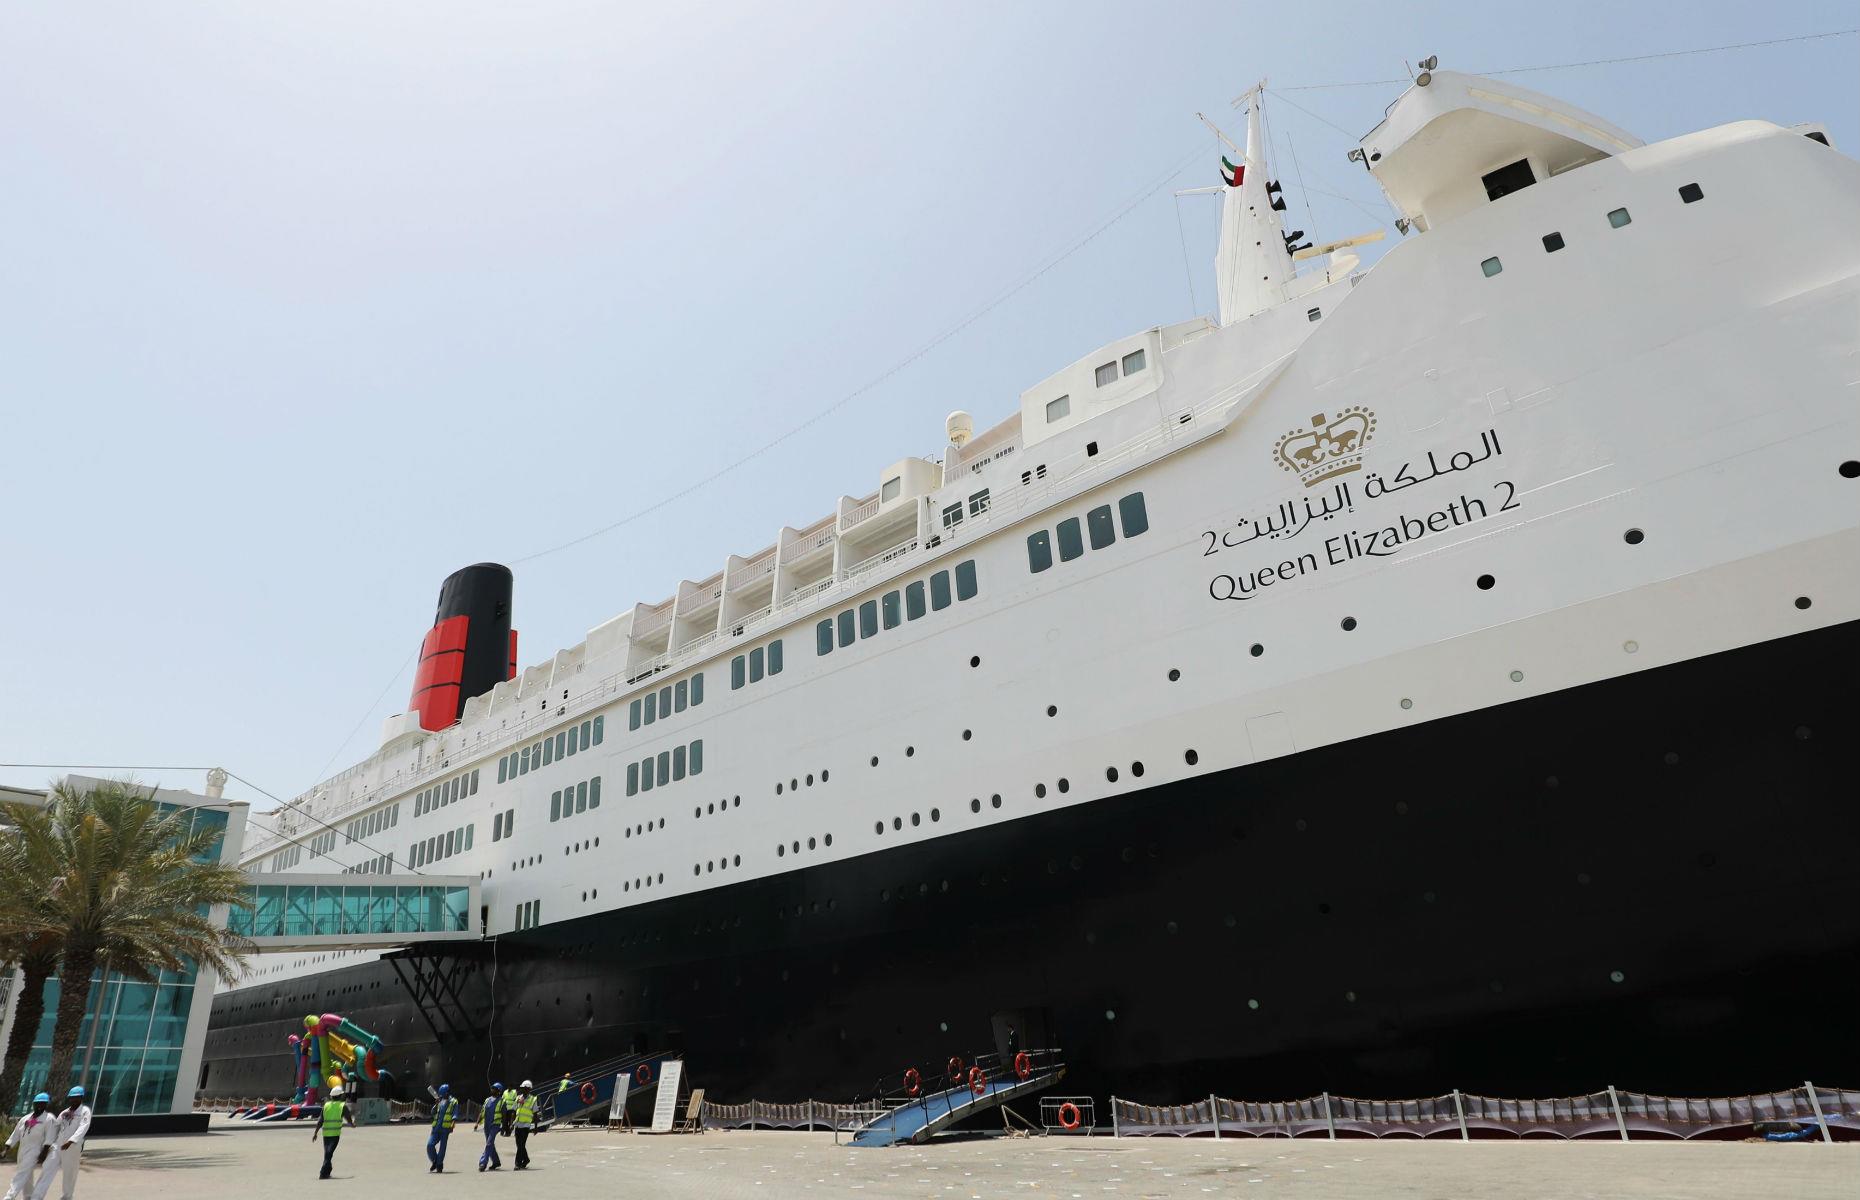 <p>In 2007, the QE2 was sold to Dubai government investment company Istithmar World for $100 million. Despite standing for almost a decade untouched in the Mina Rashid port after initial refurbishment plans were shelved, work on transforming the QE2 into a <a href="https://www.booking.com/hotel/ae/queen-elizabeth-2.en-gb.html?aid=1280739" rel="nofollow">luxury static hotel</a> finally began in 2017. Just a year later, the 13-deck venue welcomed its first visitors. The monumental destination offers heritage tours where you can glimpse the original rooms and artifacts from its time at sea. It's located in good company too, as nearby attractions include the Burj Khalifa, Dubai Mall and the Gold Souk.</p>  <p><strong><a href="https://www.loveexploring.com/guides/63333/the-best-places-to-visit-in-dubai">Discover the best places to visit</a><a href="http://www.loveexploring.com/guides/63333/the-best-places-to-visit-in-dubai"> in </a><a href="https://www.loveexploring.com/guides/63333/the-best-places-to-visit-in-dubai">Dubai</a></strong></p>